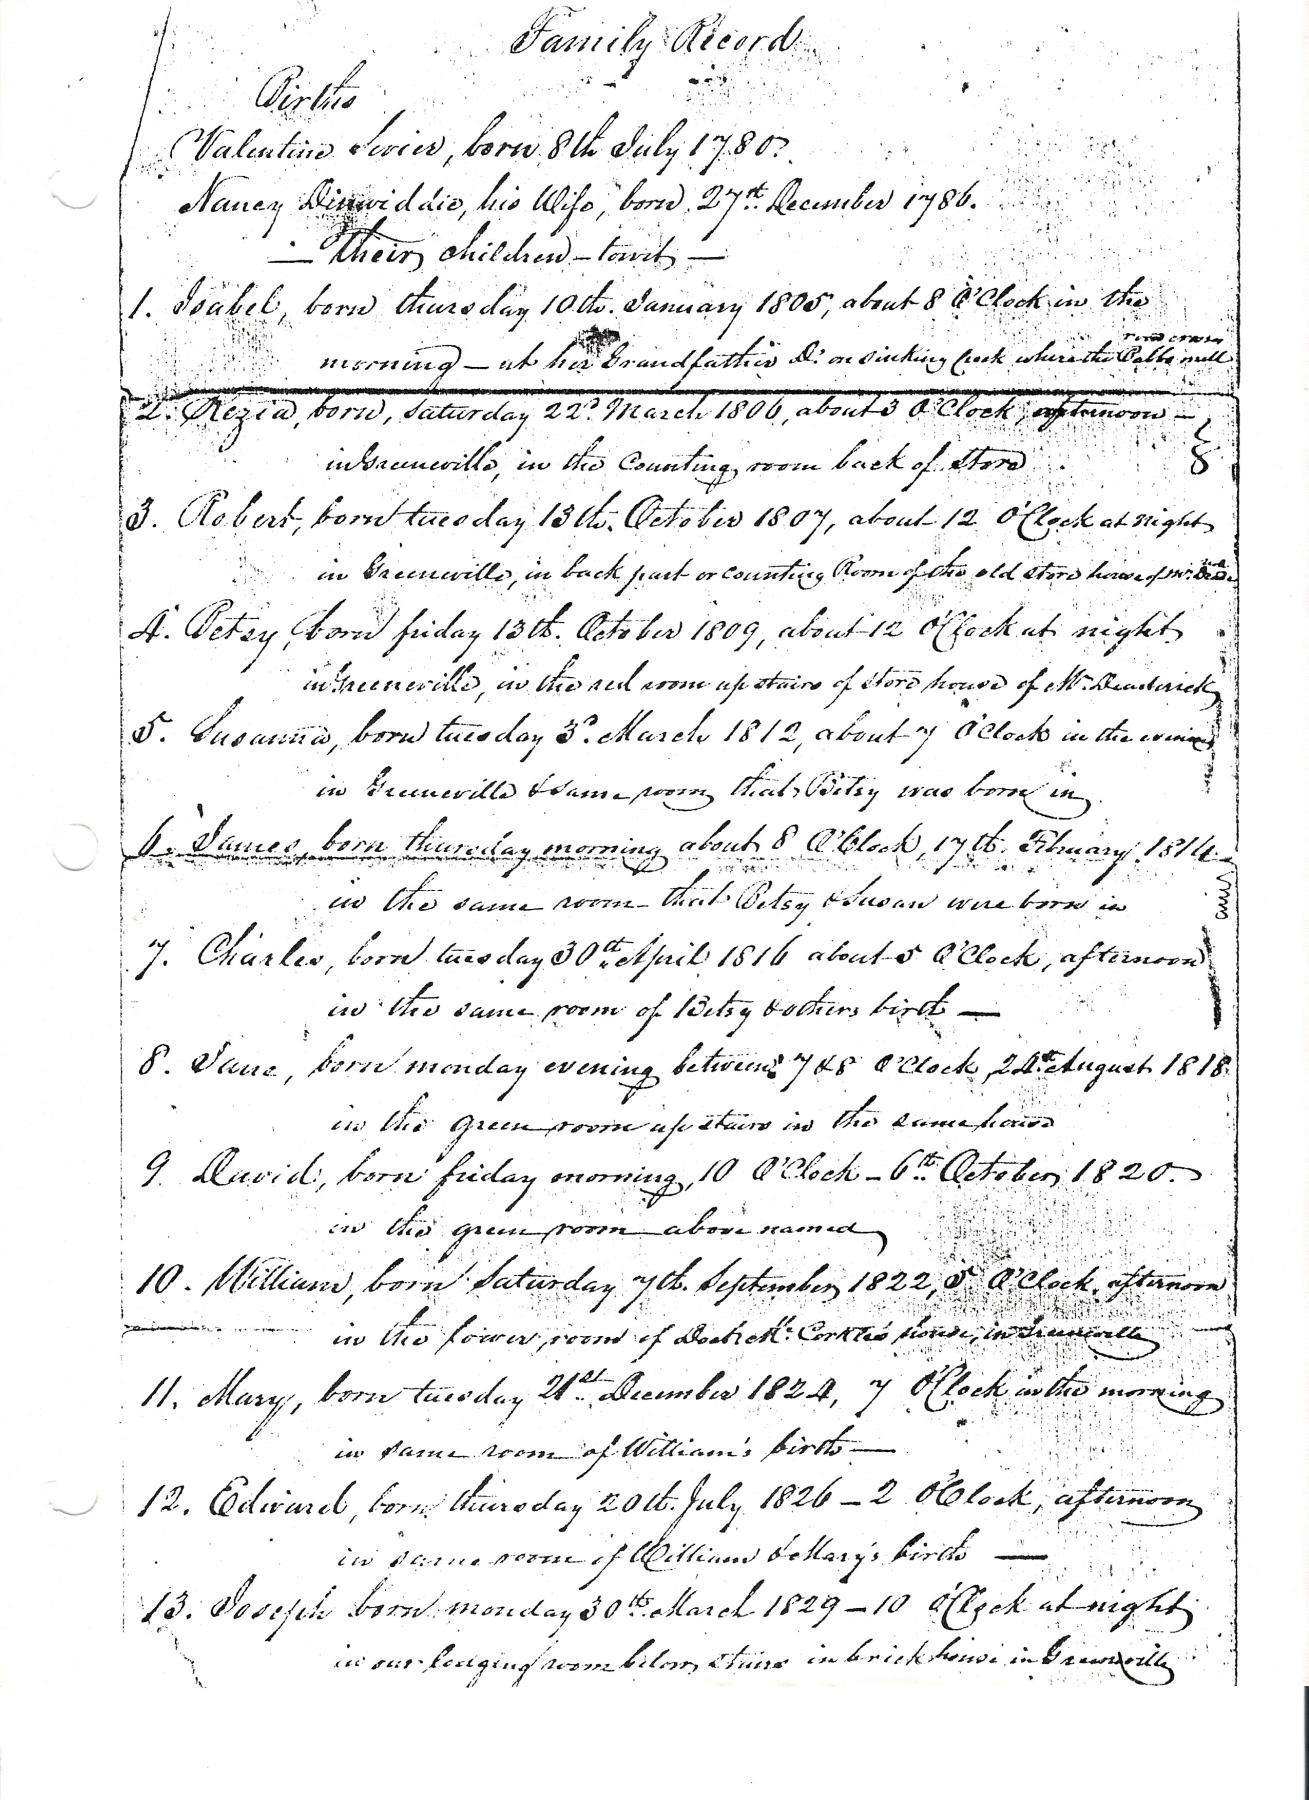 Valentine Sevier Family Record Page One